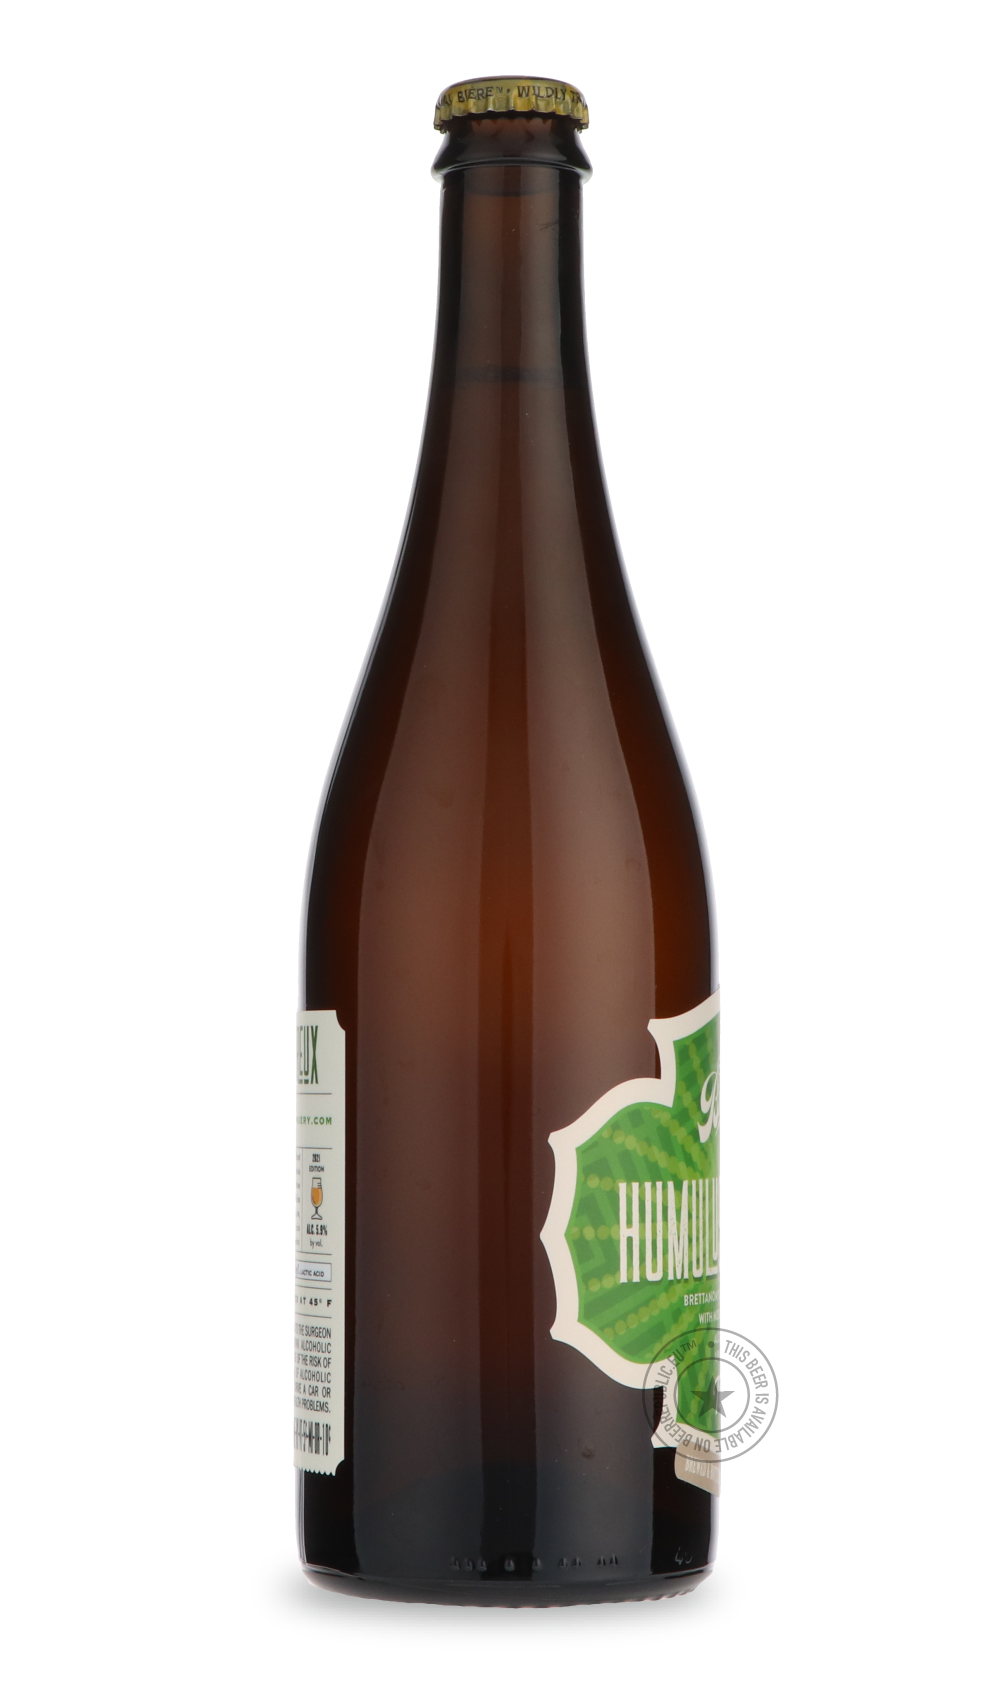 -The Bruery- Terreux Humulus (2021)-Sour / Wild & Fruity- Only @ Beer Republic - The best online beer store for American & Canadian craft beer - Buy beer online from the USA and Canada - Bier online kopen - Amerikaans bier kopen - Craft beer store - Craft beer kopen - Amerikanisch bier kaufen - Bier online kaufen - Acheter biere online - IPA - Stout - Porter - New England IPA - Hazy IPA - Imperial Stout - Barrel Aged - Barrel Aged Imperial Stout - Brown - Dark beer - Blond - Blonde - Pilsner - Lager - Wheat